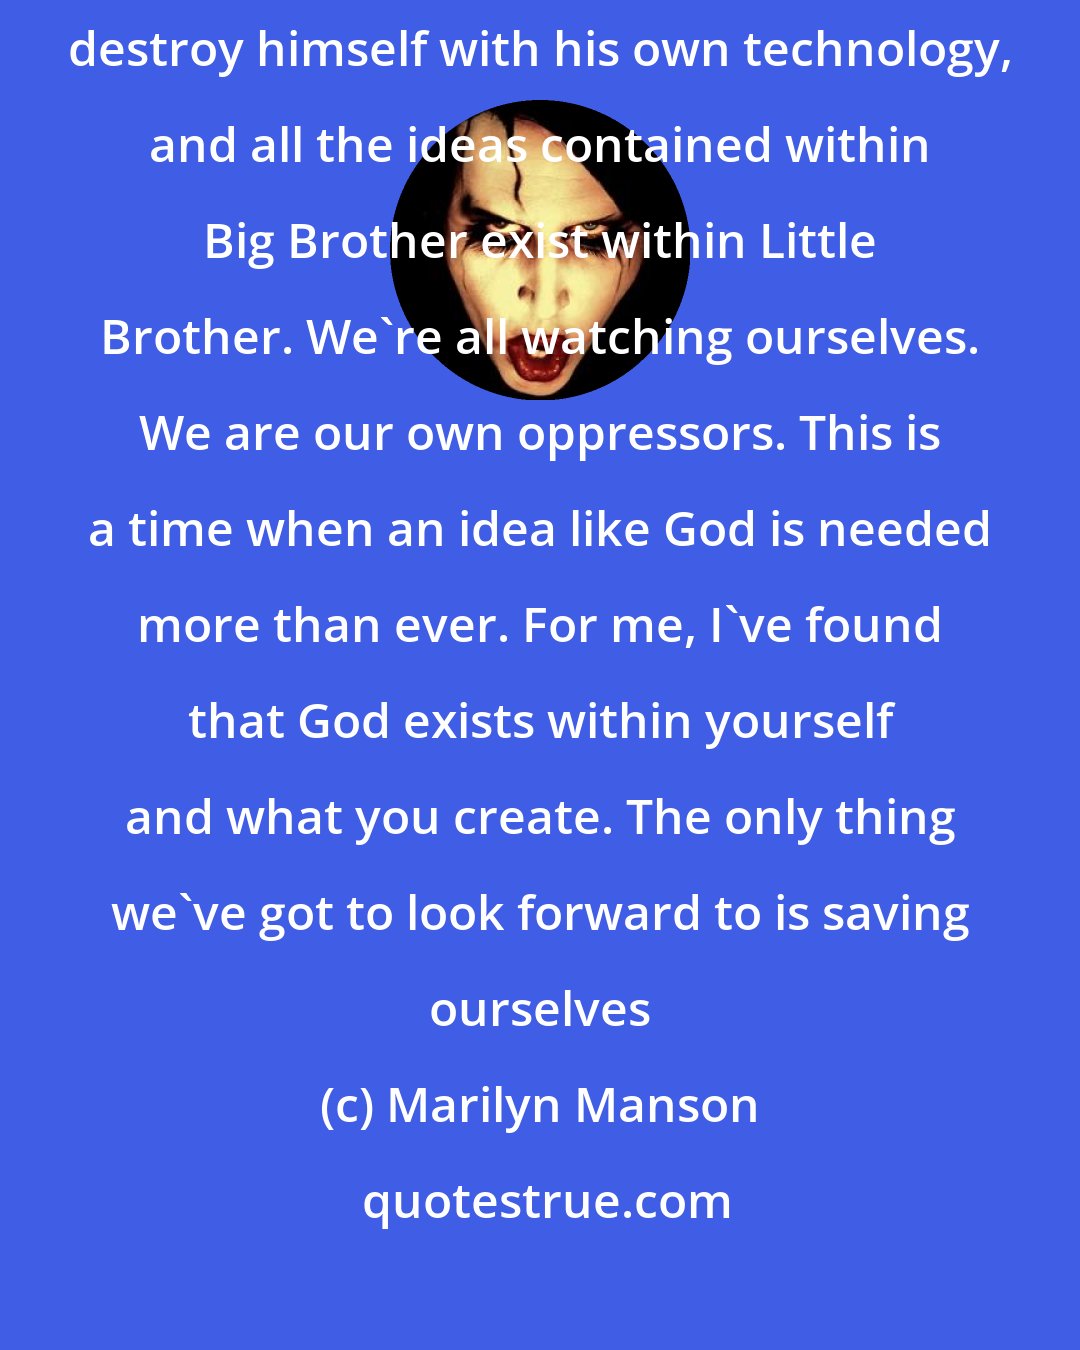 Marilyn Manson: It happens every millennium. Now more than ever, man threatens to destroy himself with his own technology, and all the ideas contained within Big Brother exist within Little Brother. We're all watching ourselves. We are our own oppressors. This is a time when an idea like God is needed more than ever. For me, I've found that God exists within yourself and what you create. The only thing we've got to look forward to is saving ourselves